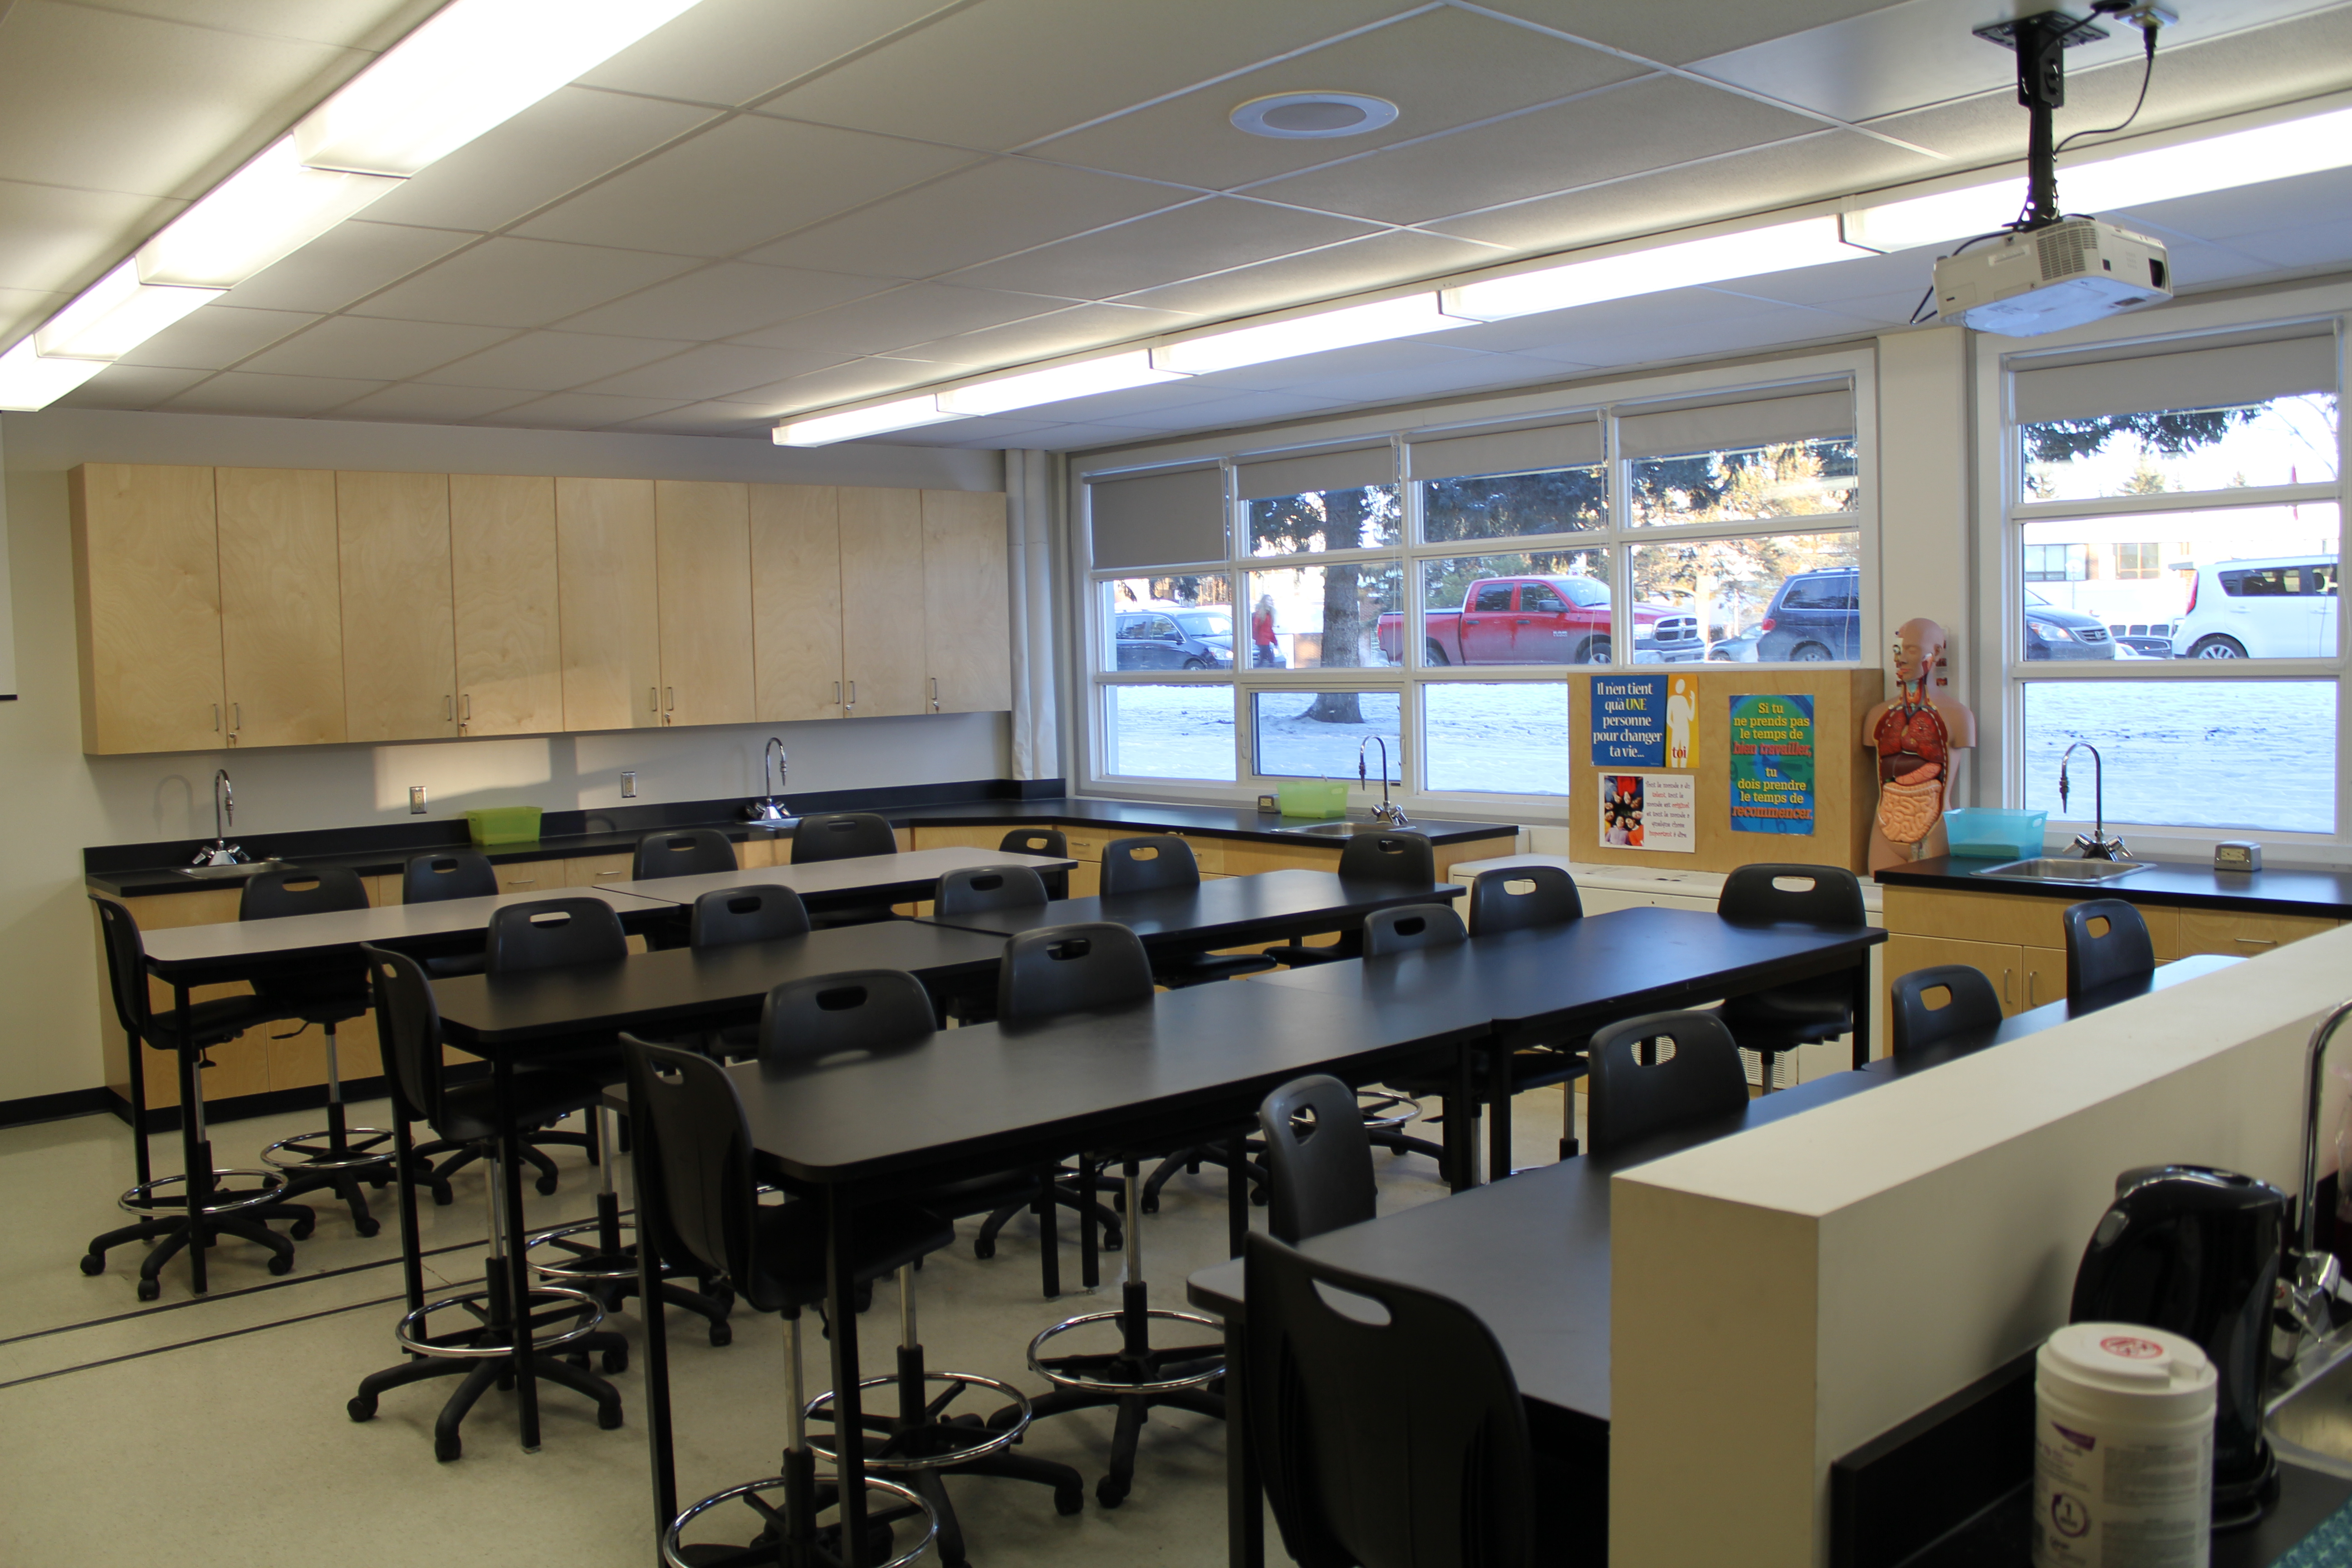 Our new Science Lab